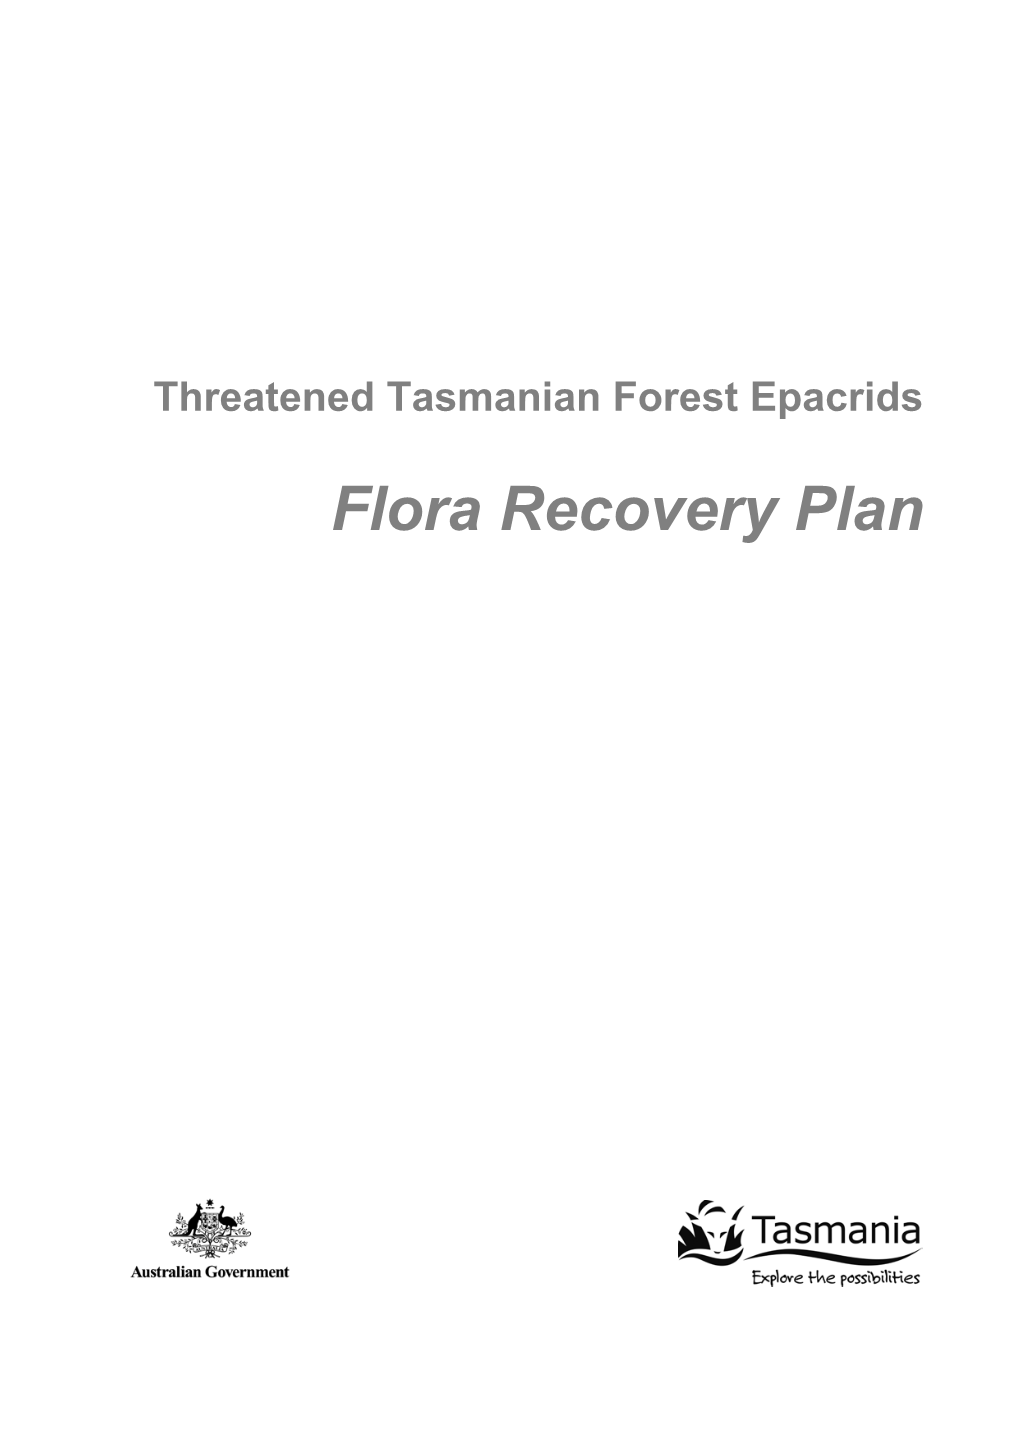 Flora Recovery Plan: Threatened Tasmanian Forest Epacrids I